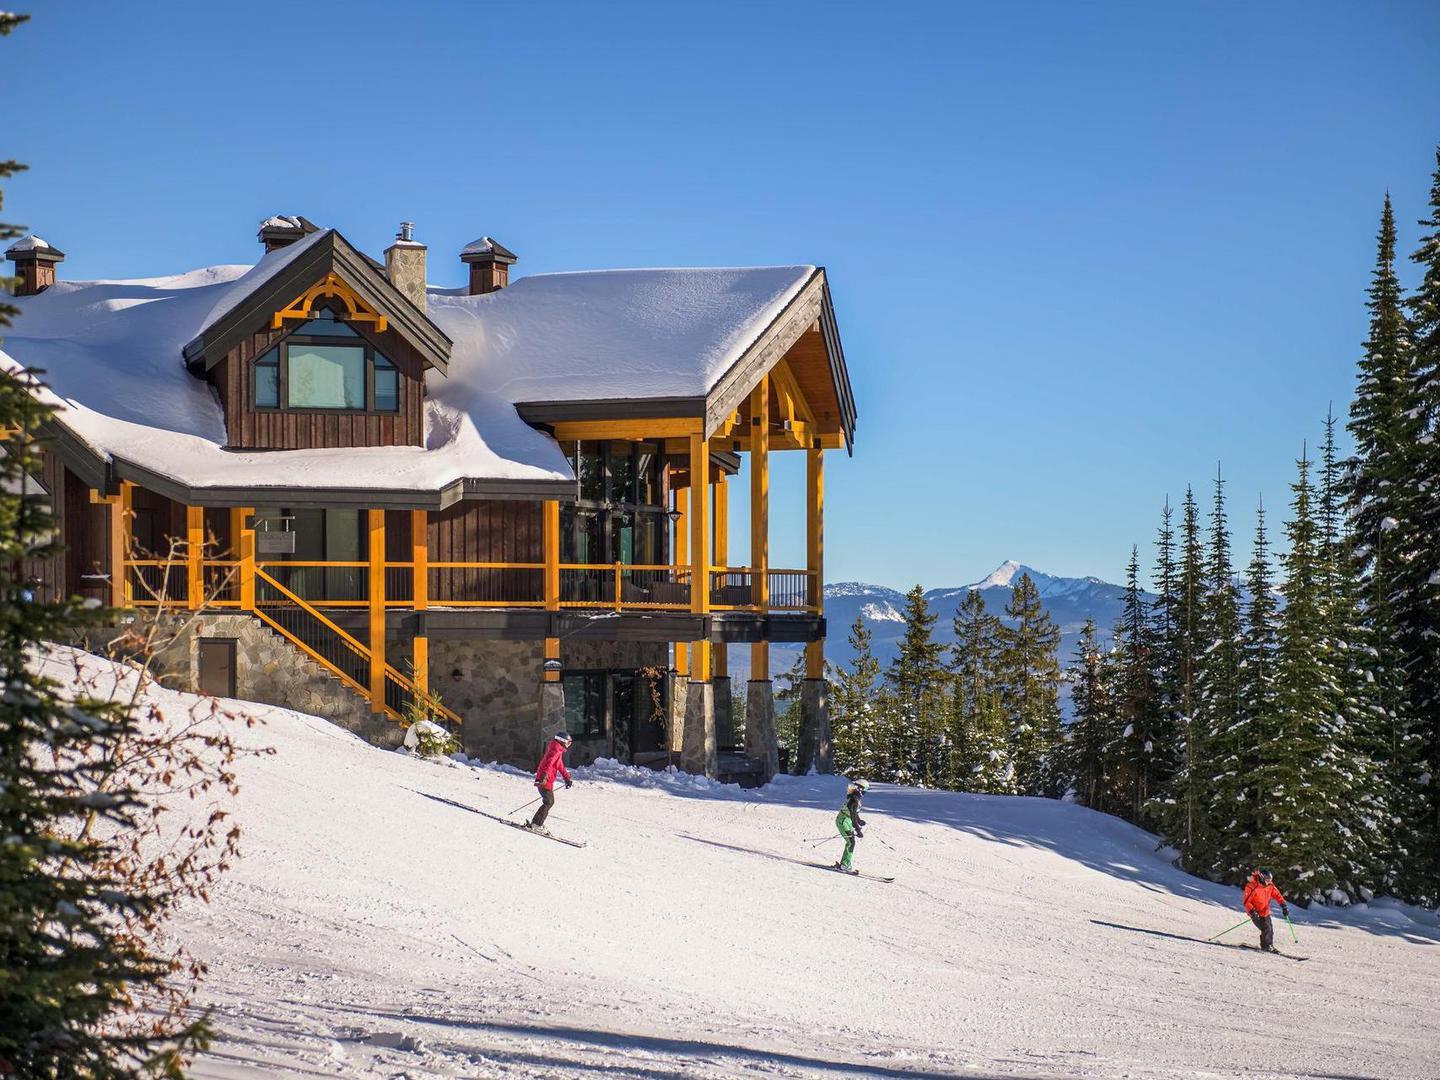 A group of skiiers ski past one of Luxury Mountain Vacation Rentals' luxury vacation rental at Big White Ski Resort, which has excellent ski in ski out access to the mountain.